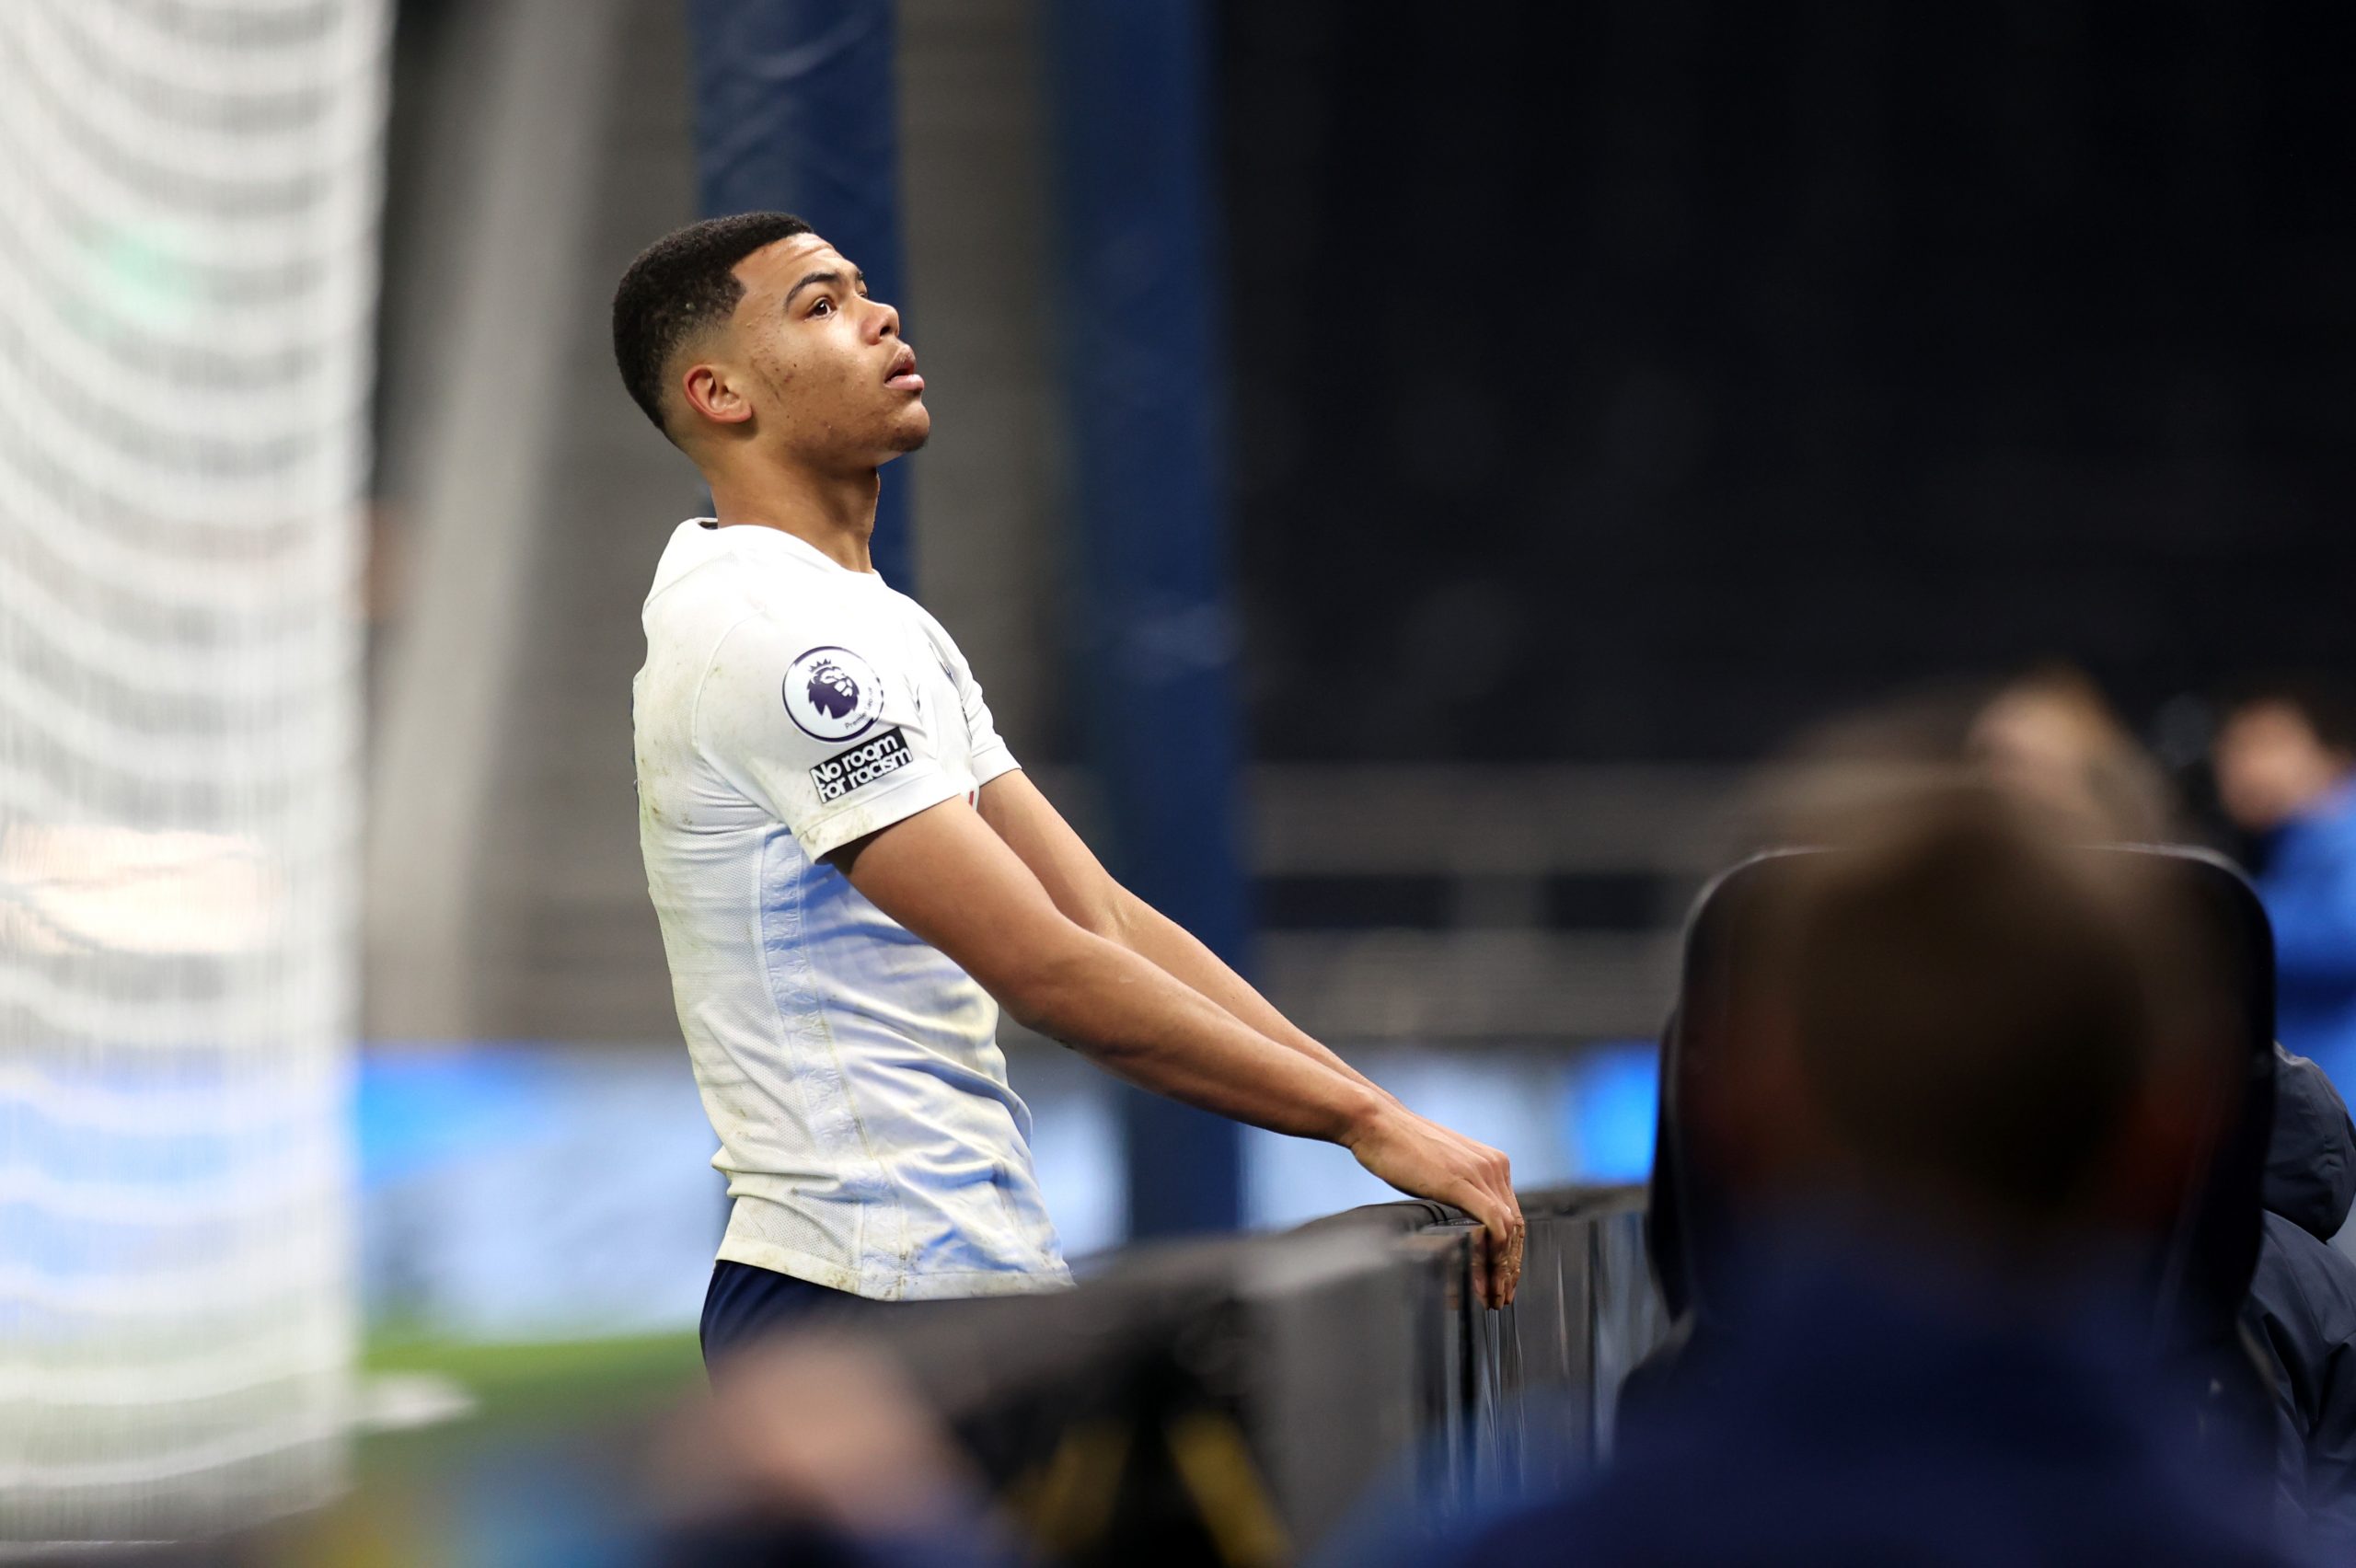 LONDON, ENGLAND - JANUARY 17: Dane Scarlett of Tottenham reacts to a missed chance during the Premier League 2 match between Tottenham Hotspur U23 and Blackburn Rovers U23 at Tottenham Hotspur Stadium on January 17, 2022 in London, England. (Photo by Alex Pantling/Getty Images)